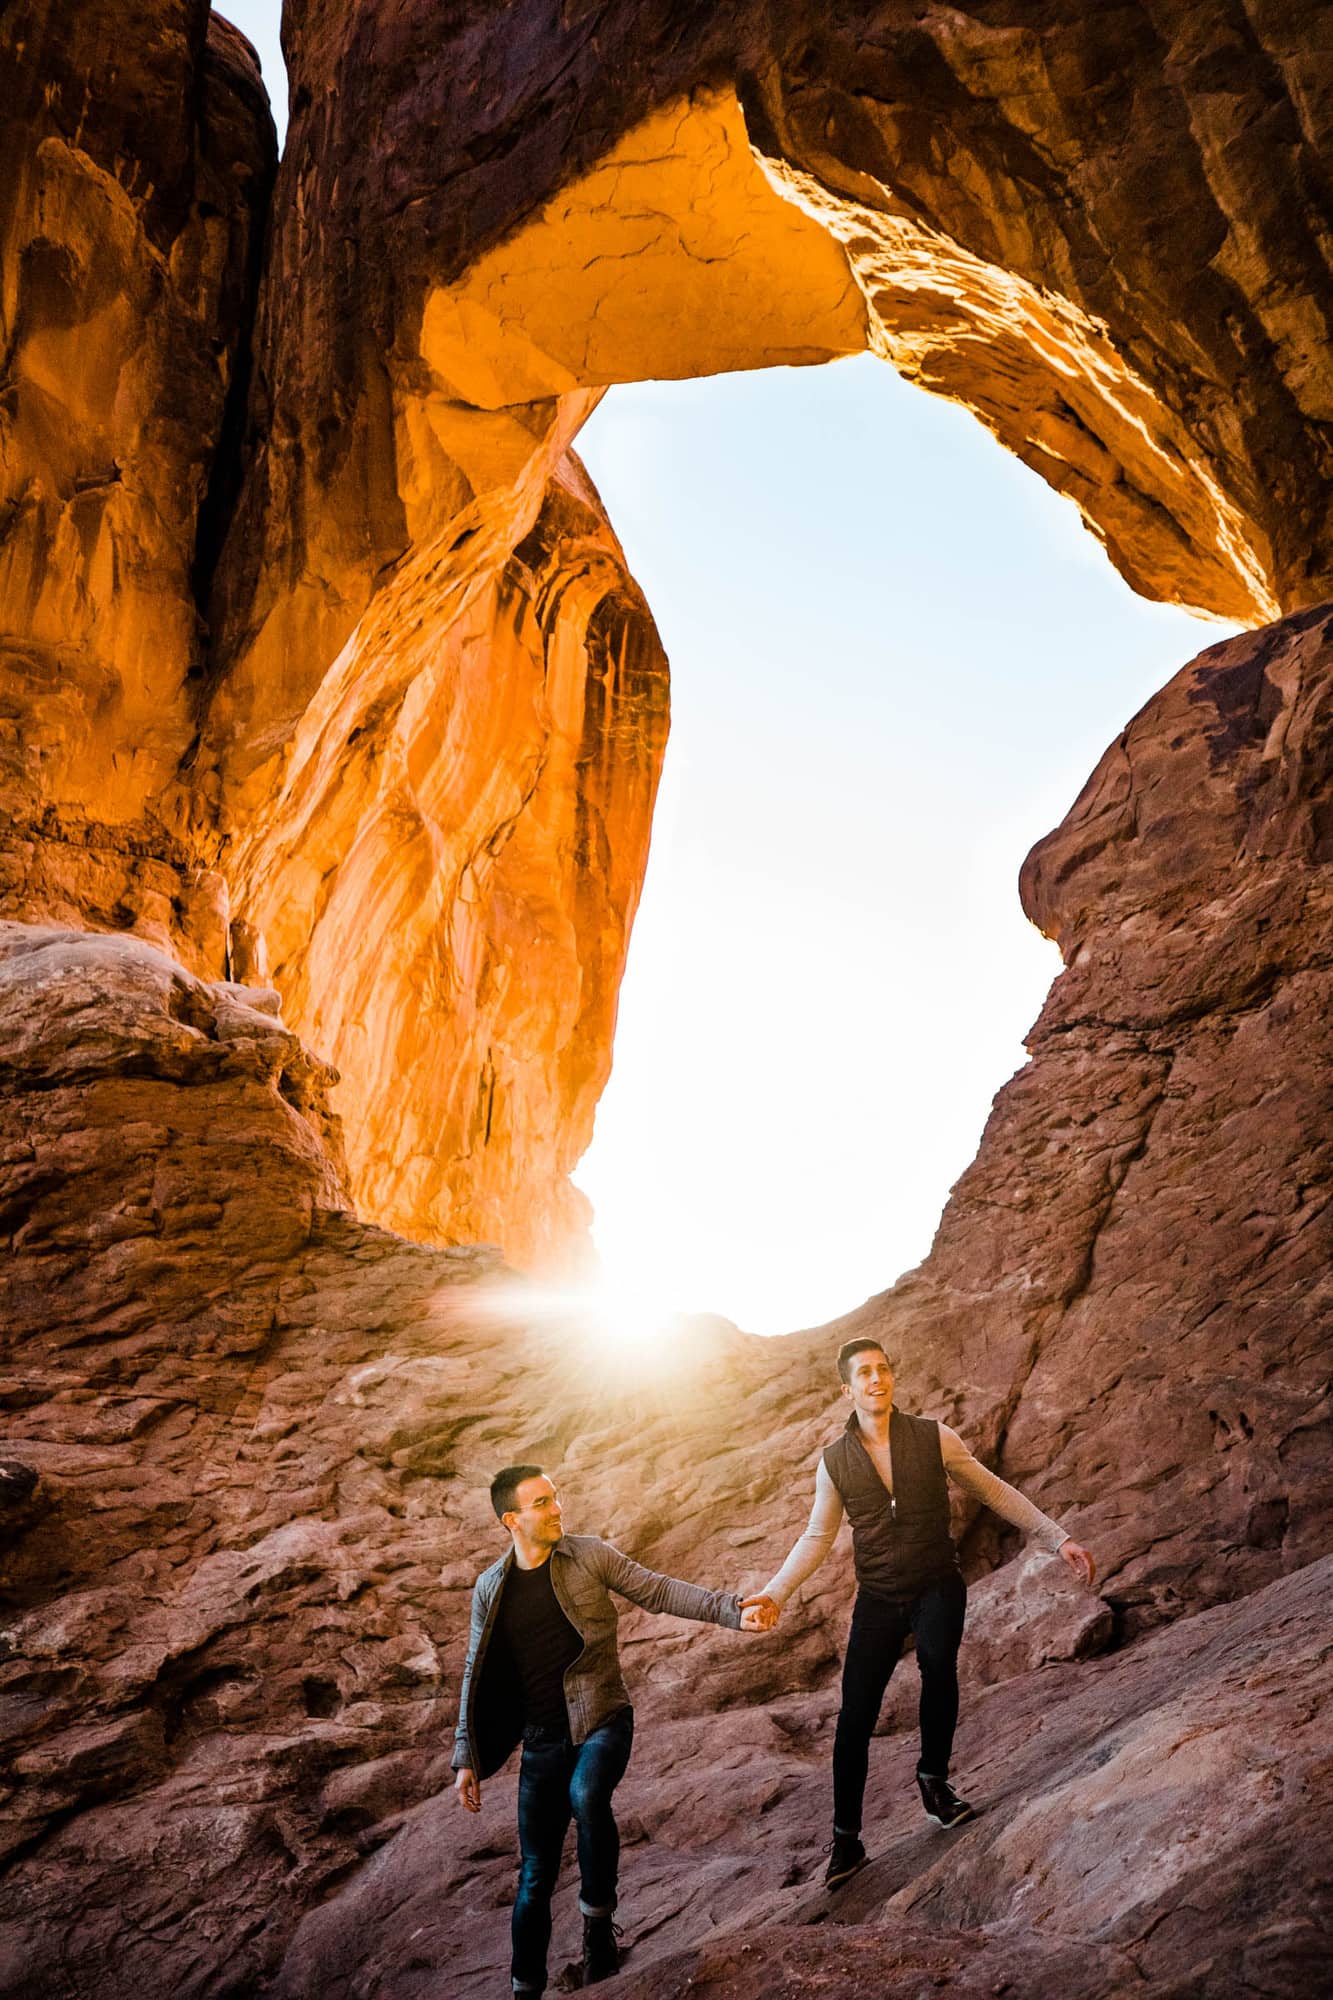 This couple had an EPIC adventure- deciding to have a Moab *and* Dunton Hot Springs wedding celebration to honor their recent nuptials.